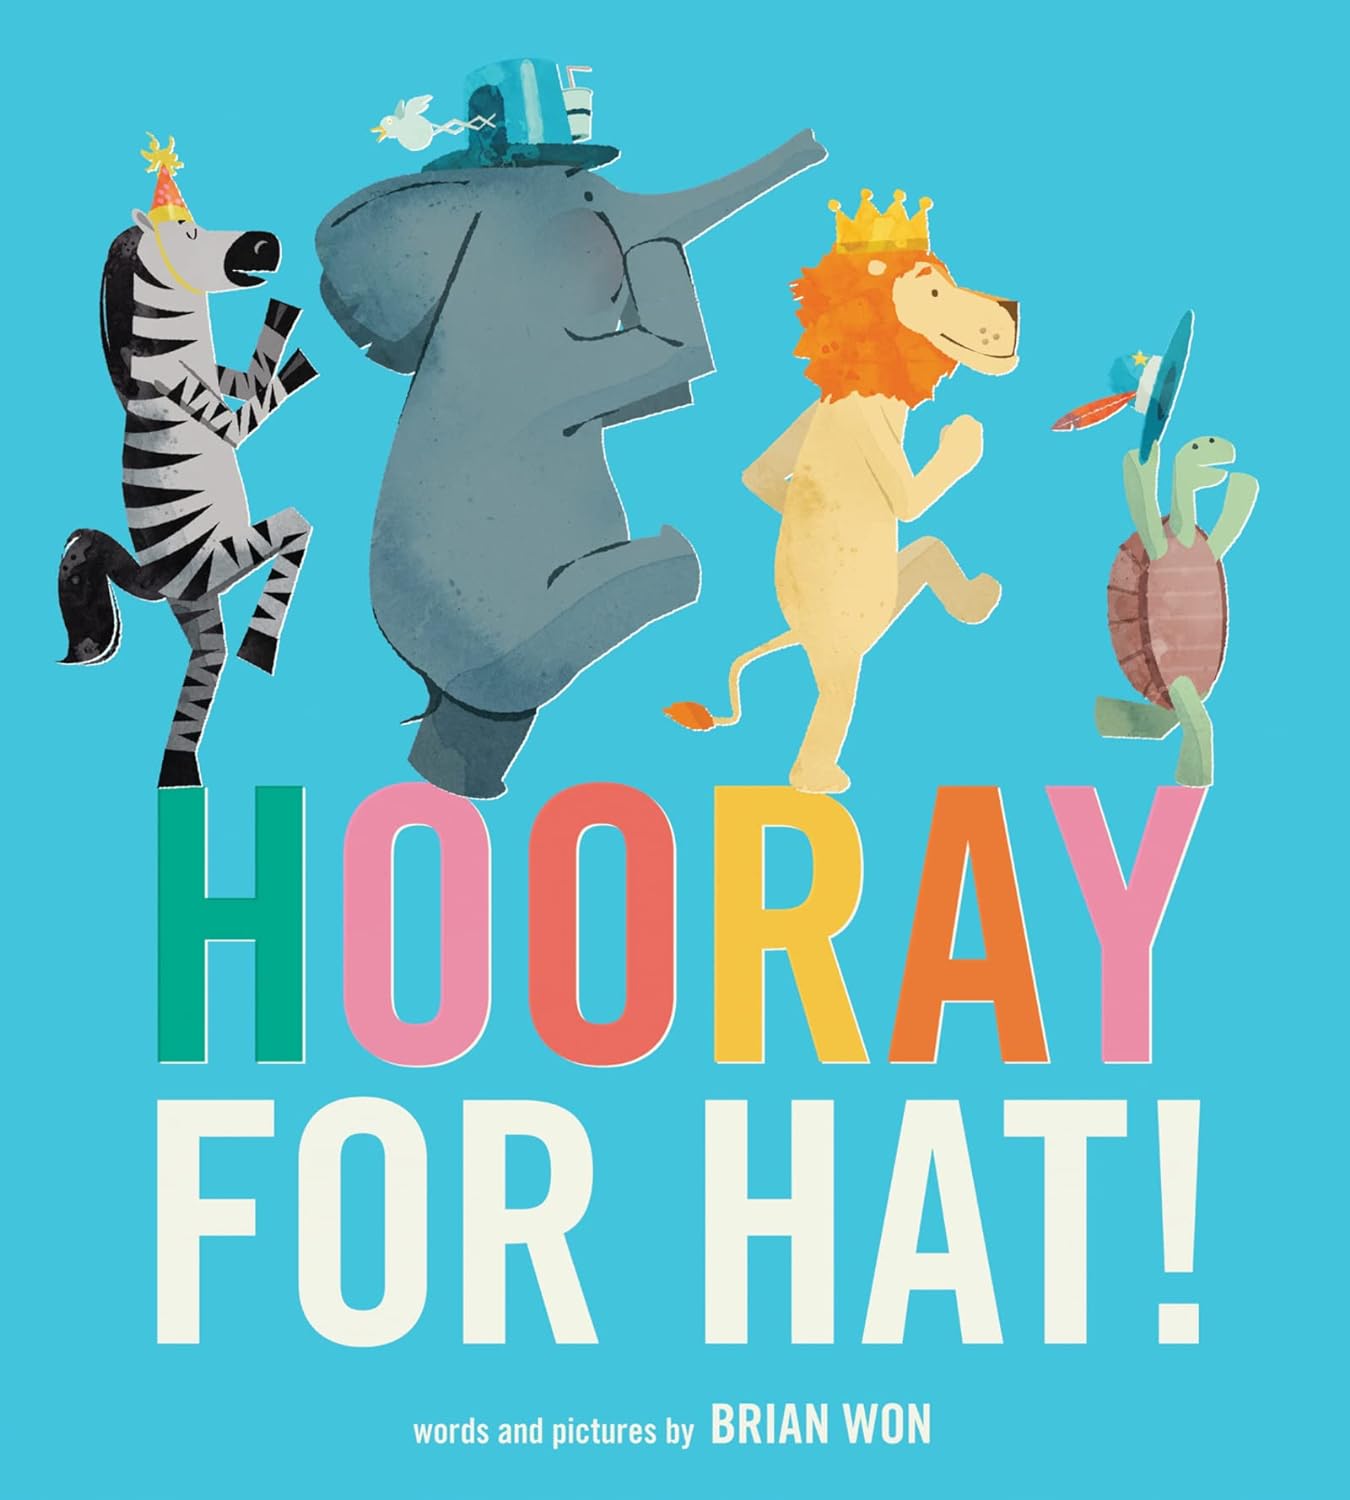 Hooray for Hat by Brian Won